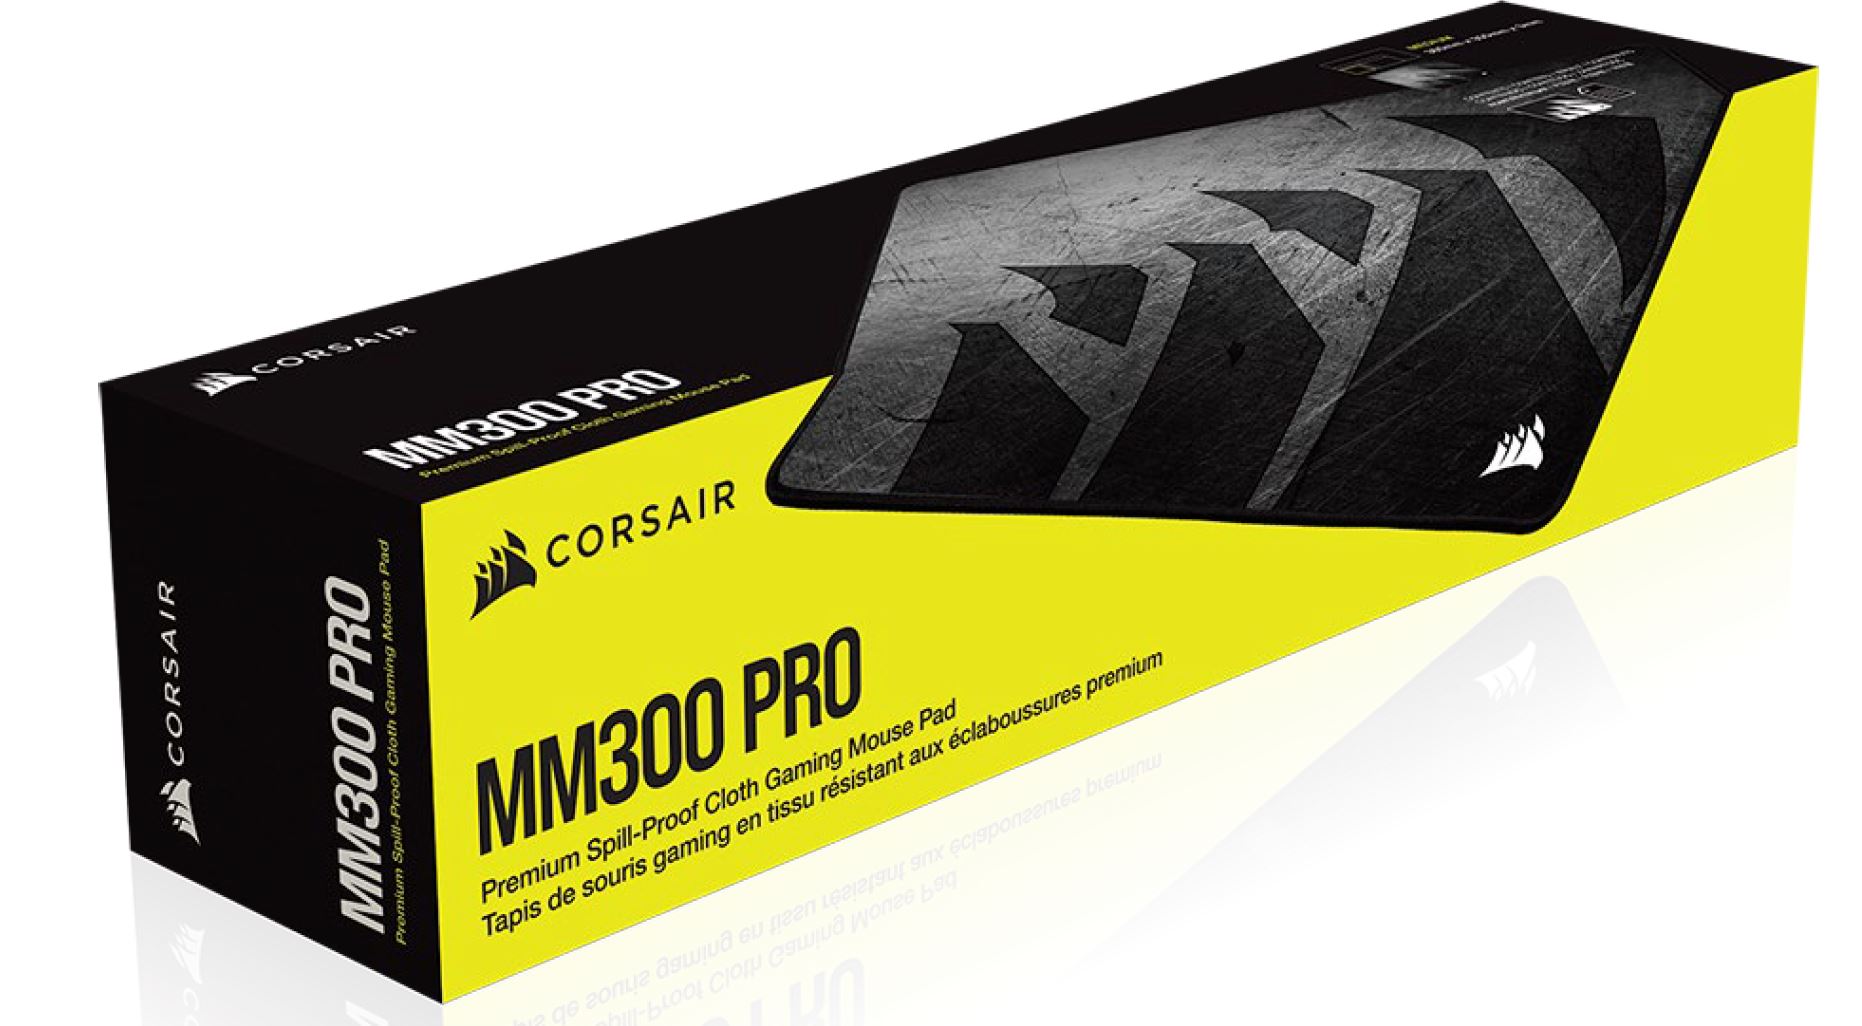 Keyboards and Mice/Corsair: Corsair, MM300, PRO, Premium, Spill-Proof, Cloth, Gaming, Mouse, Pad, â€“, Medium, -, 360mm, x, 300mm, x, 3mm, Graphic, Surface, 